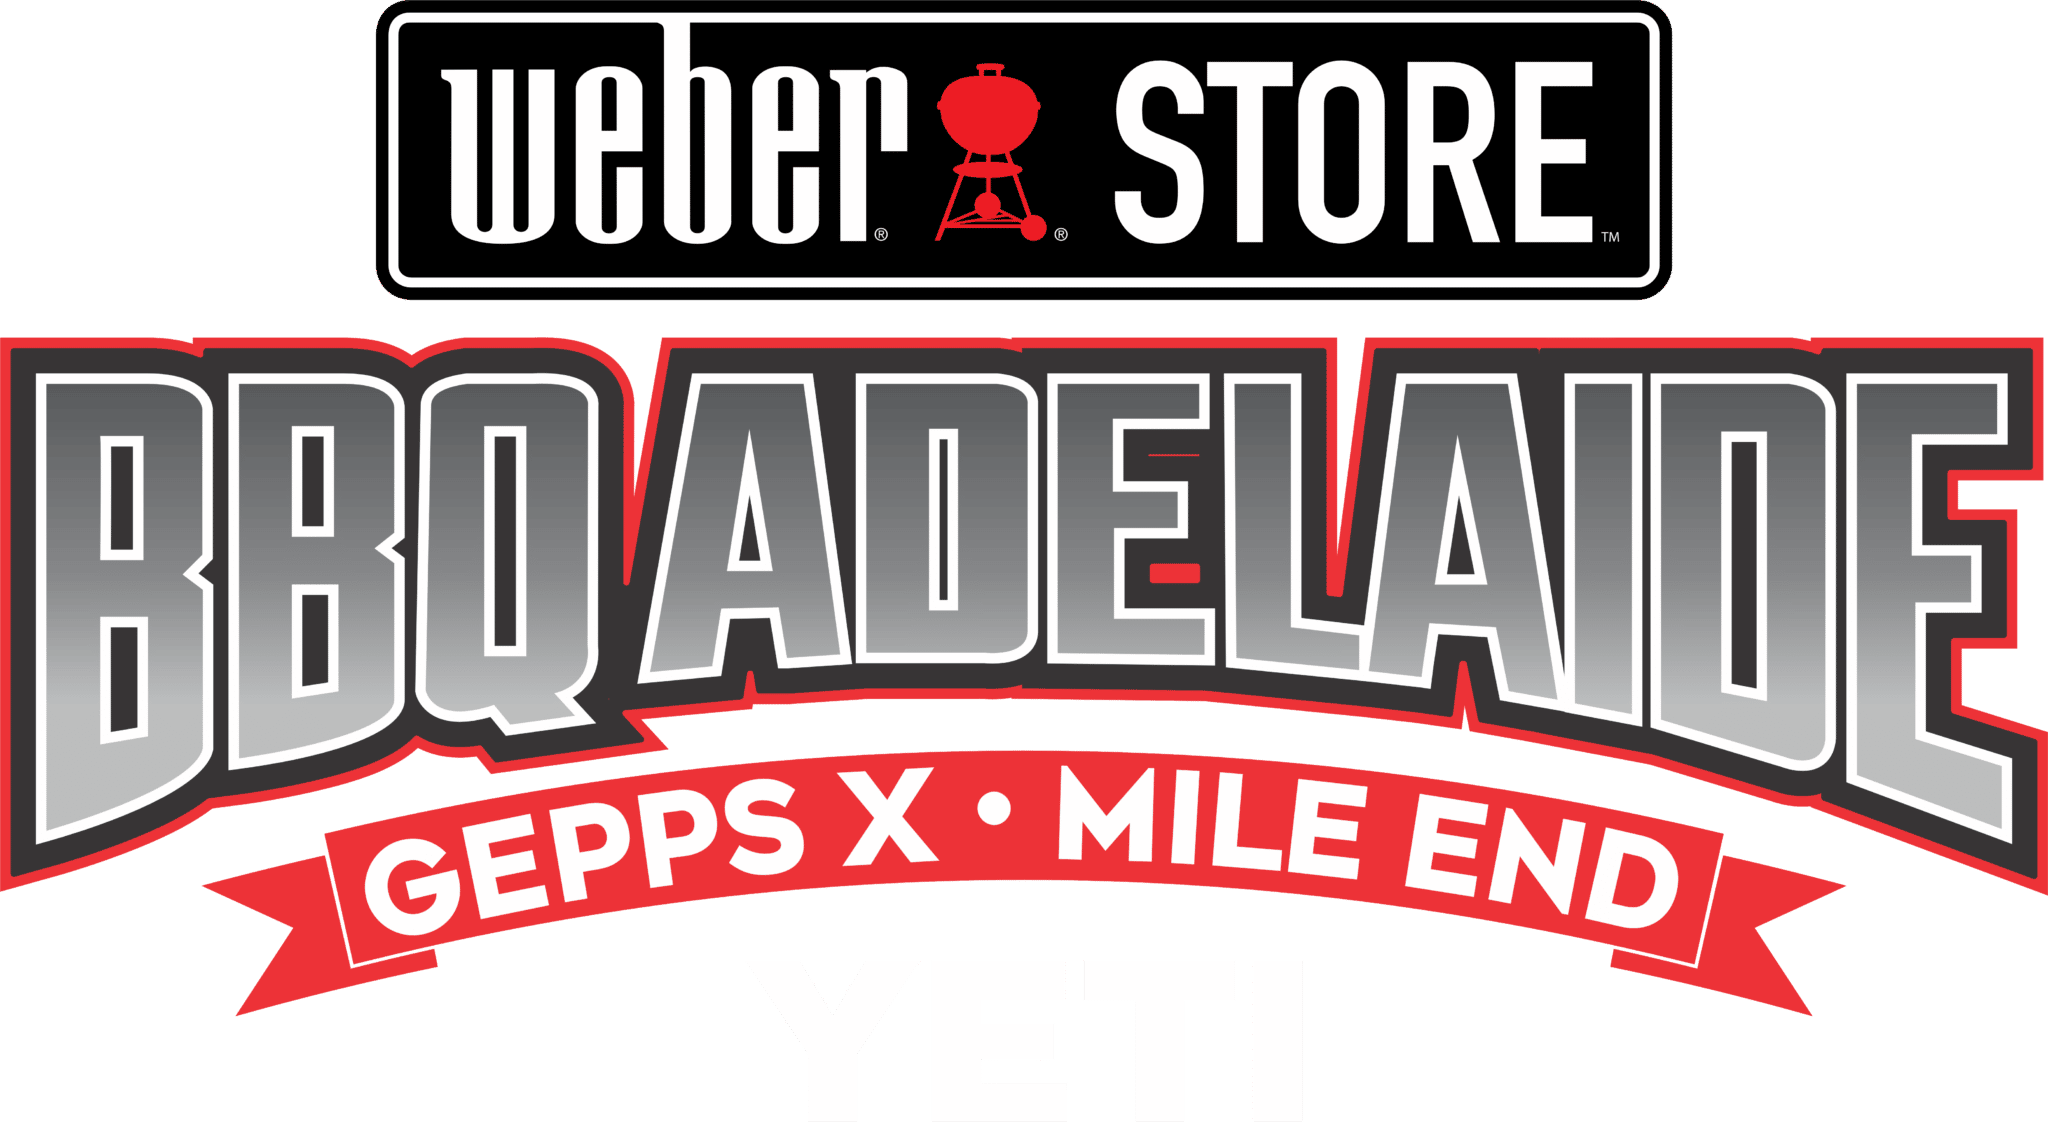 BBQ Adelaide – Weber Store Gepps Cross & Mile End